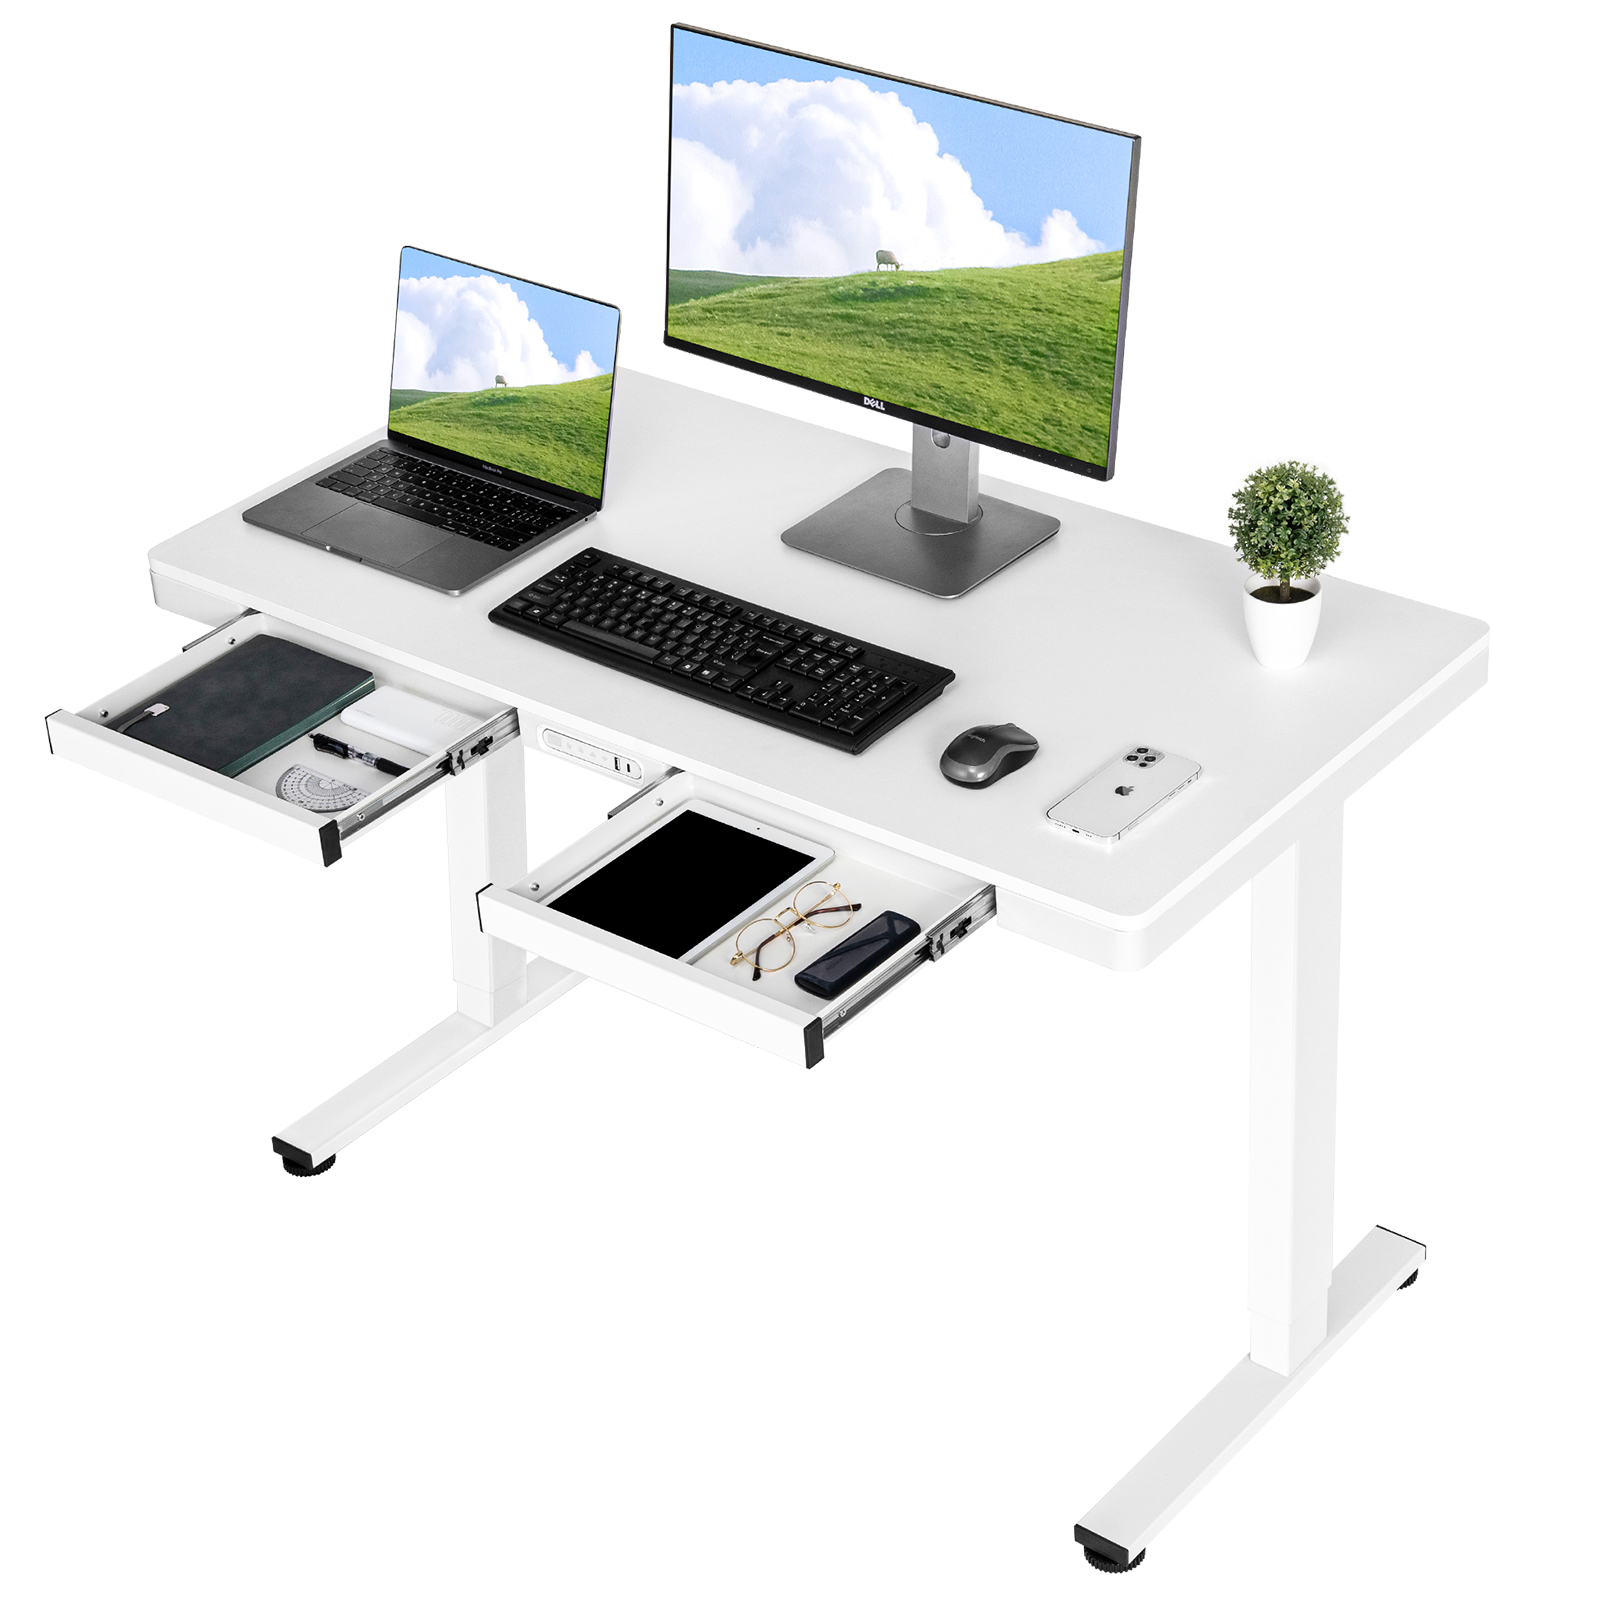 TOPSKY Electric Adjustable Standing Desk with Drawers and Charging USB Port, 47.2"x23.6" Whole-Piece Quick Install Computer Laptop Table for Home and Office DF07.01